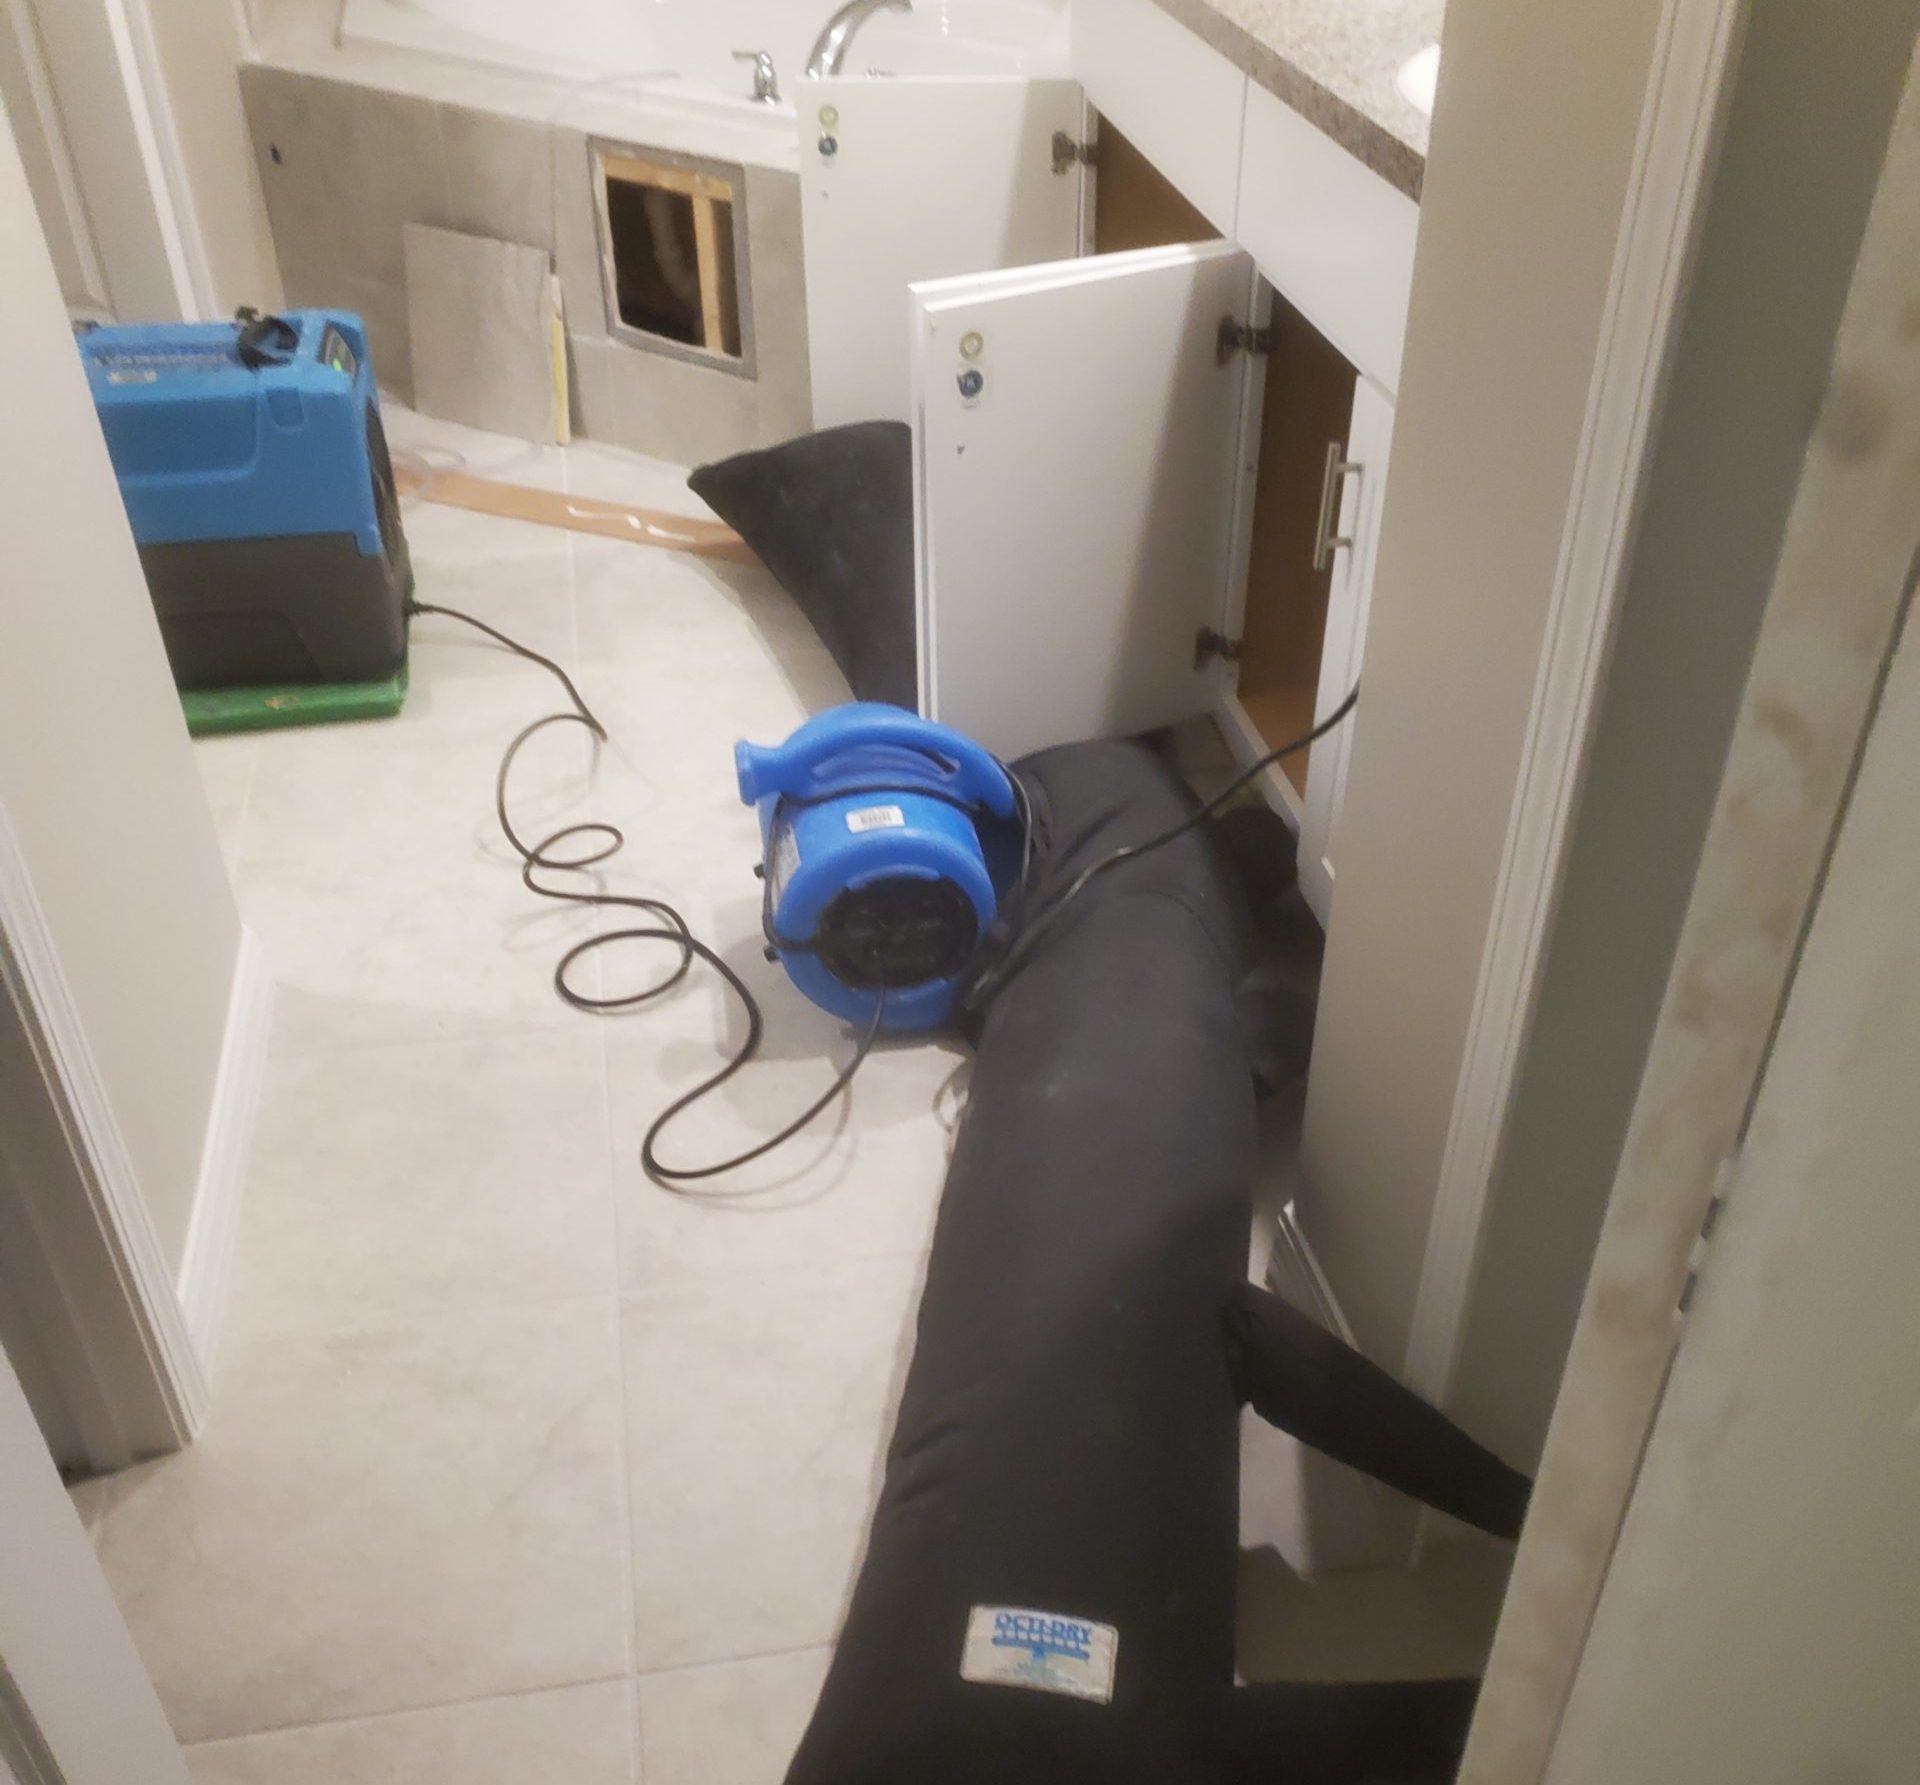 Water Damage Restoration Services in Tampa bay area